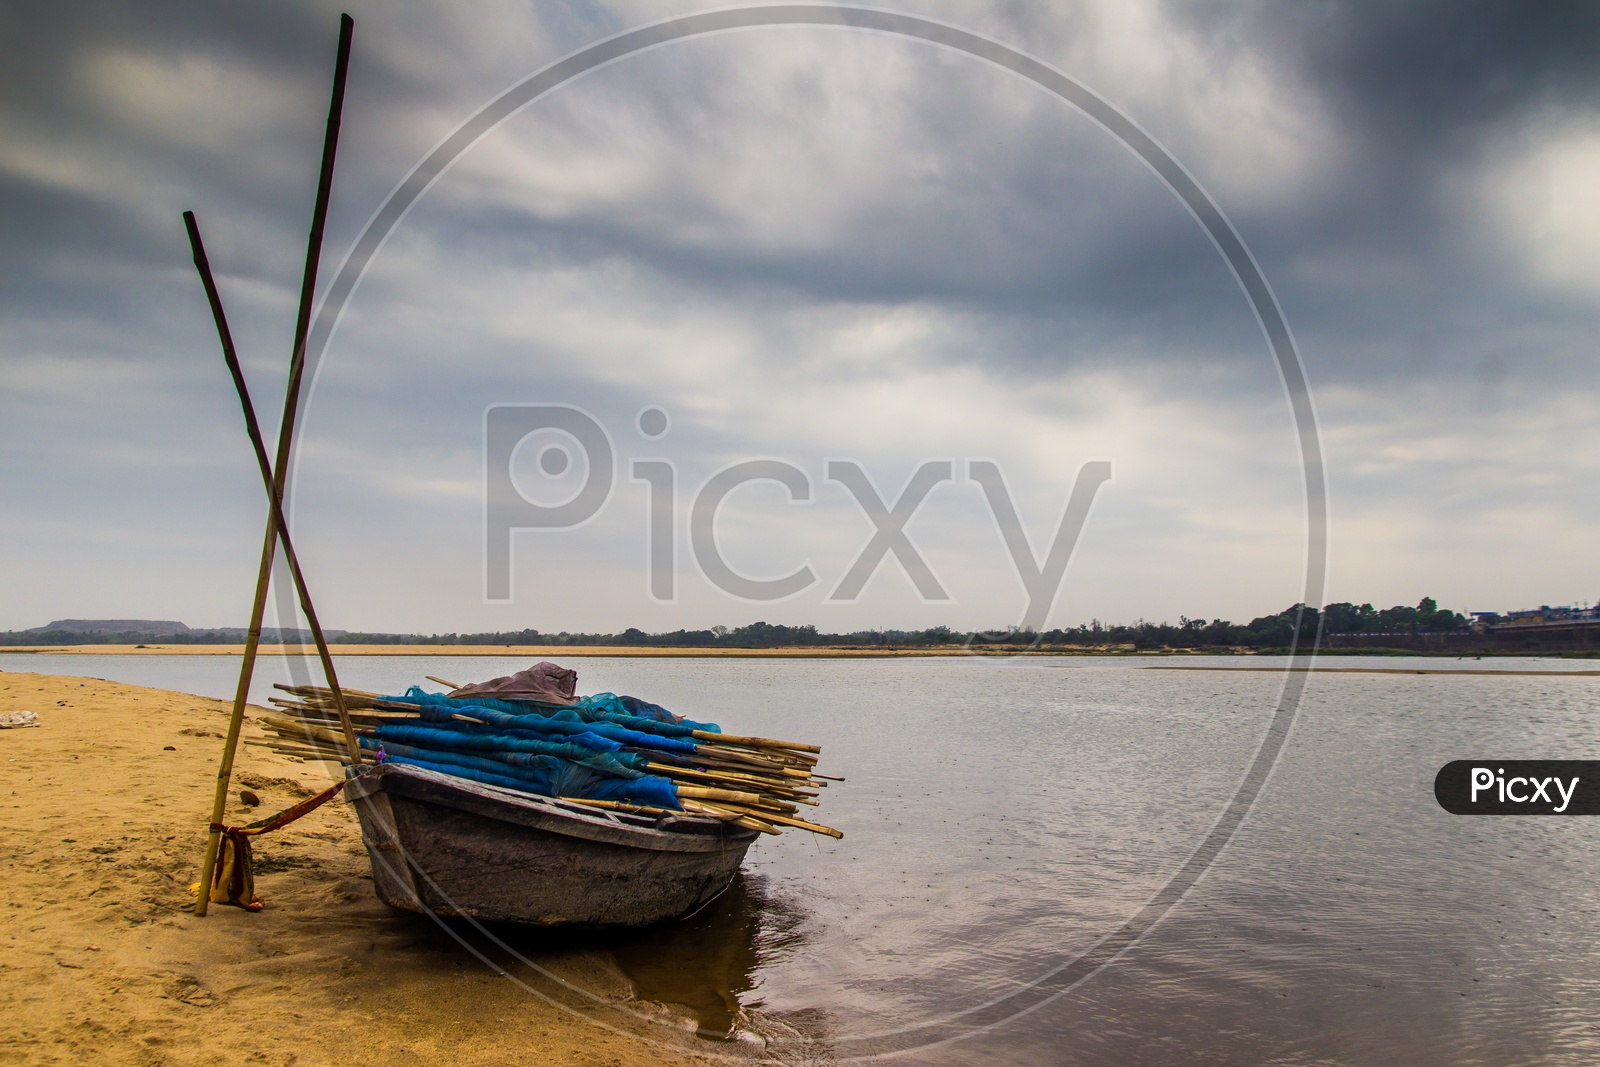 Landscape Of A Boar Tied At The Corner Of River Bed Sandy Beach And Cloudy Sky Day Time Scene.